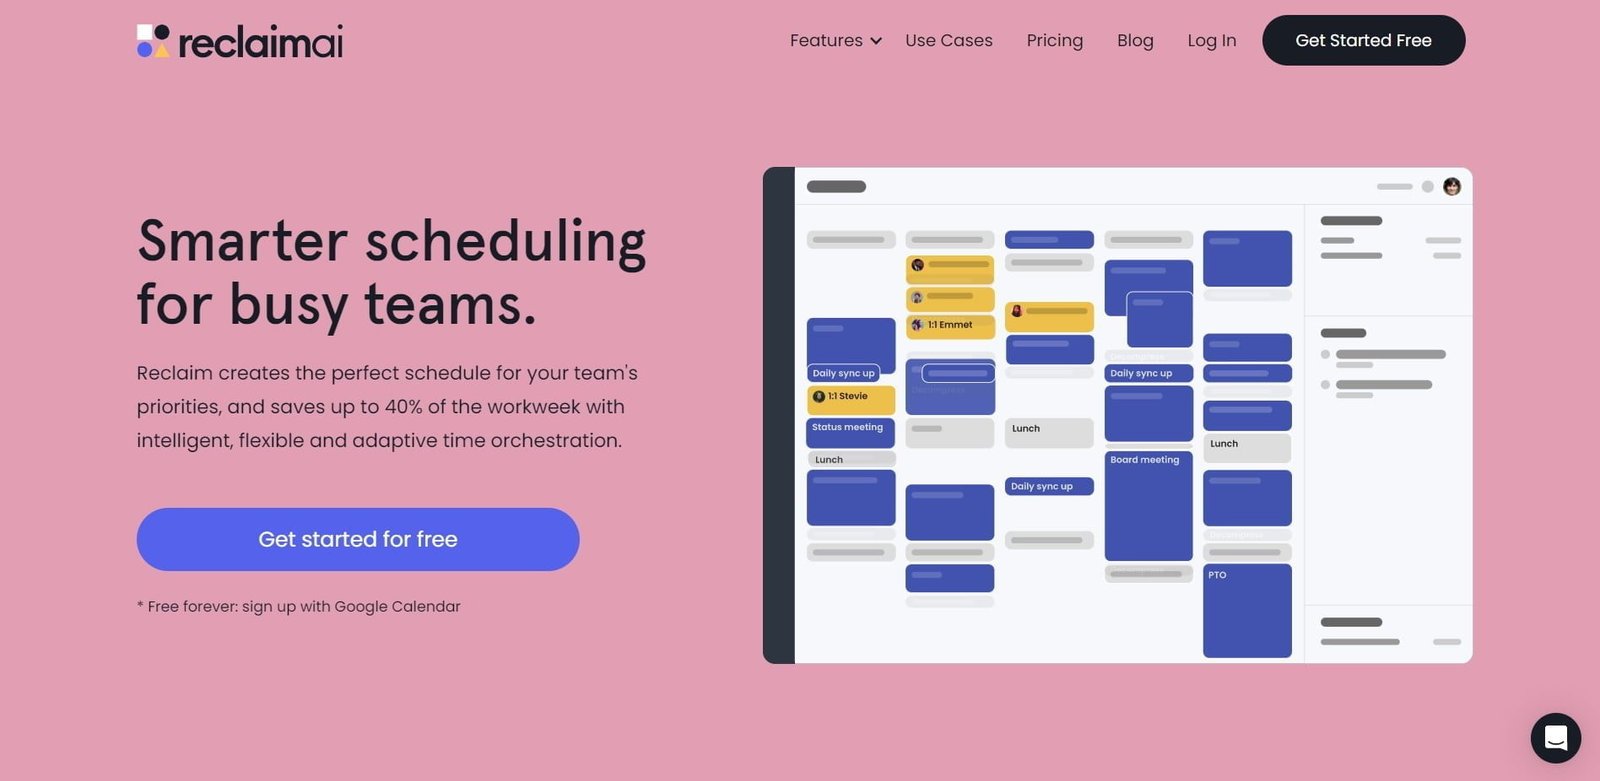 Reclaim.ai is an innovative AI scheduling time management tool designed for busy teams